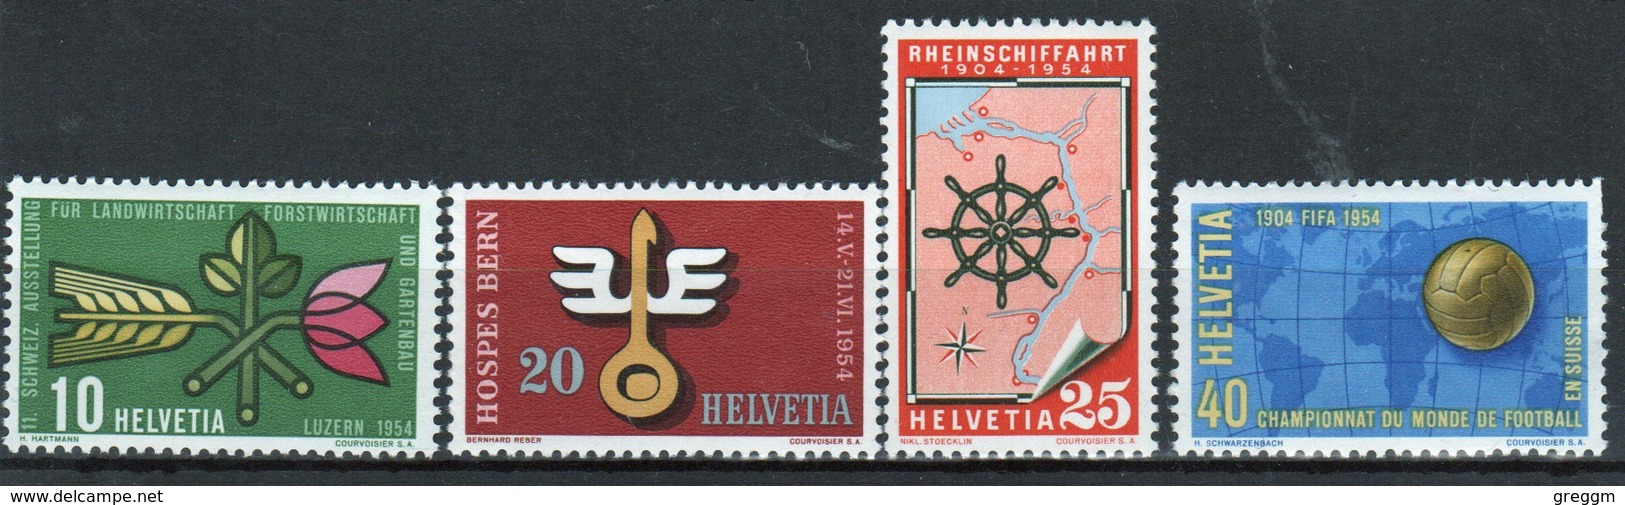 Switzerland 1954 Set Of Stamps To Issued To Commemorate Publicity Issue. - Unused Stamps